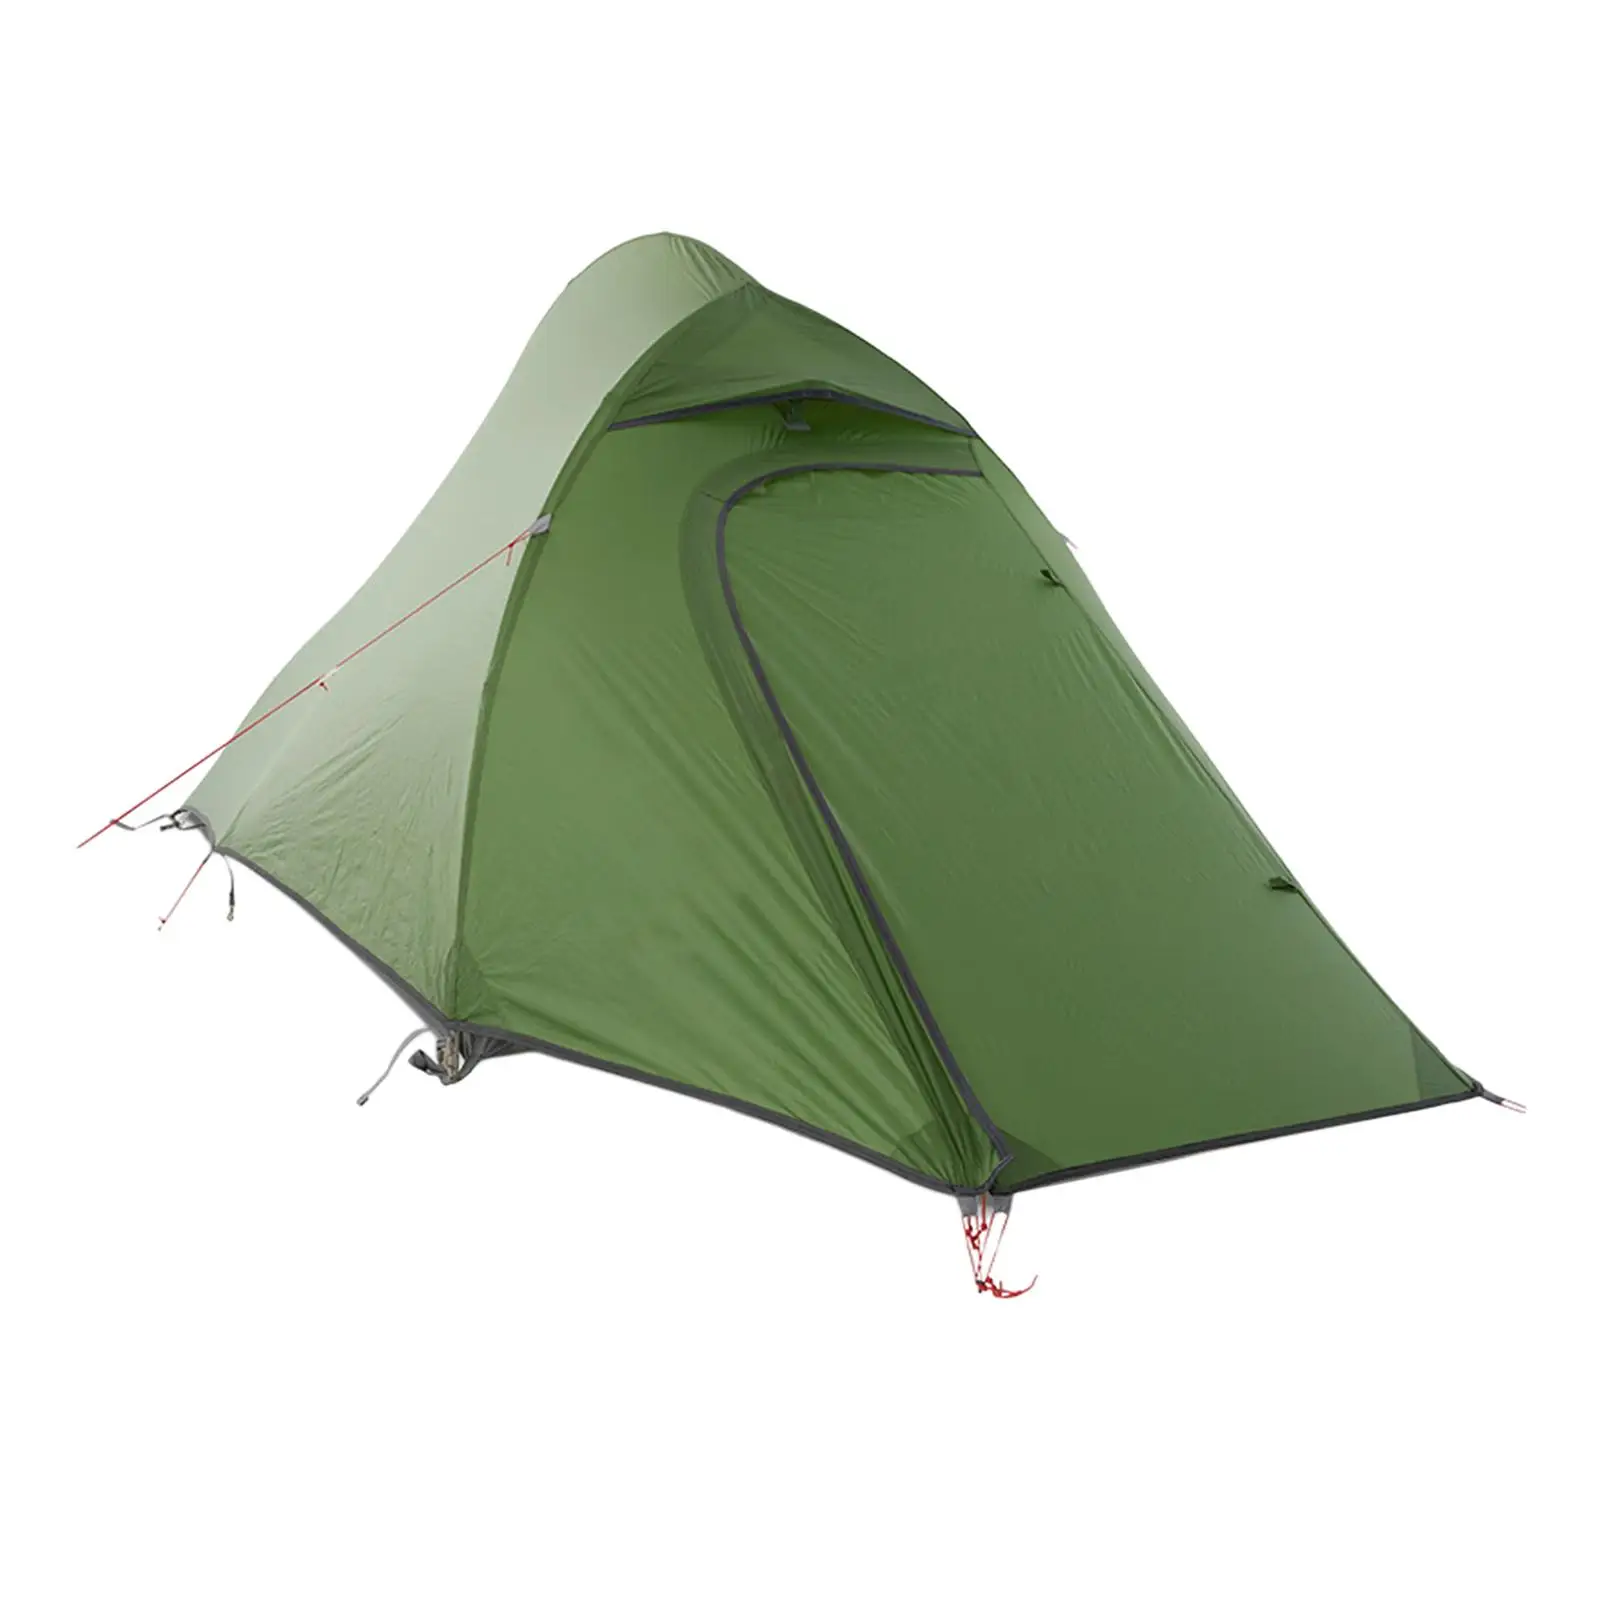 Camping Tent Lightweight Foldable Trekking Tent for Summer Travel Fishing